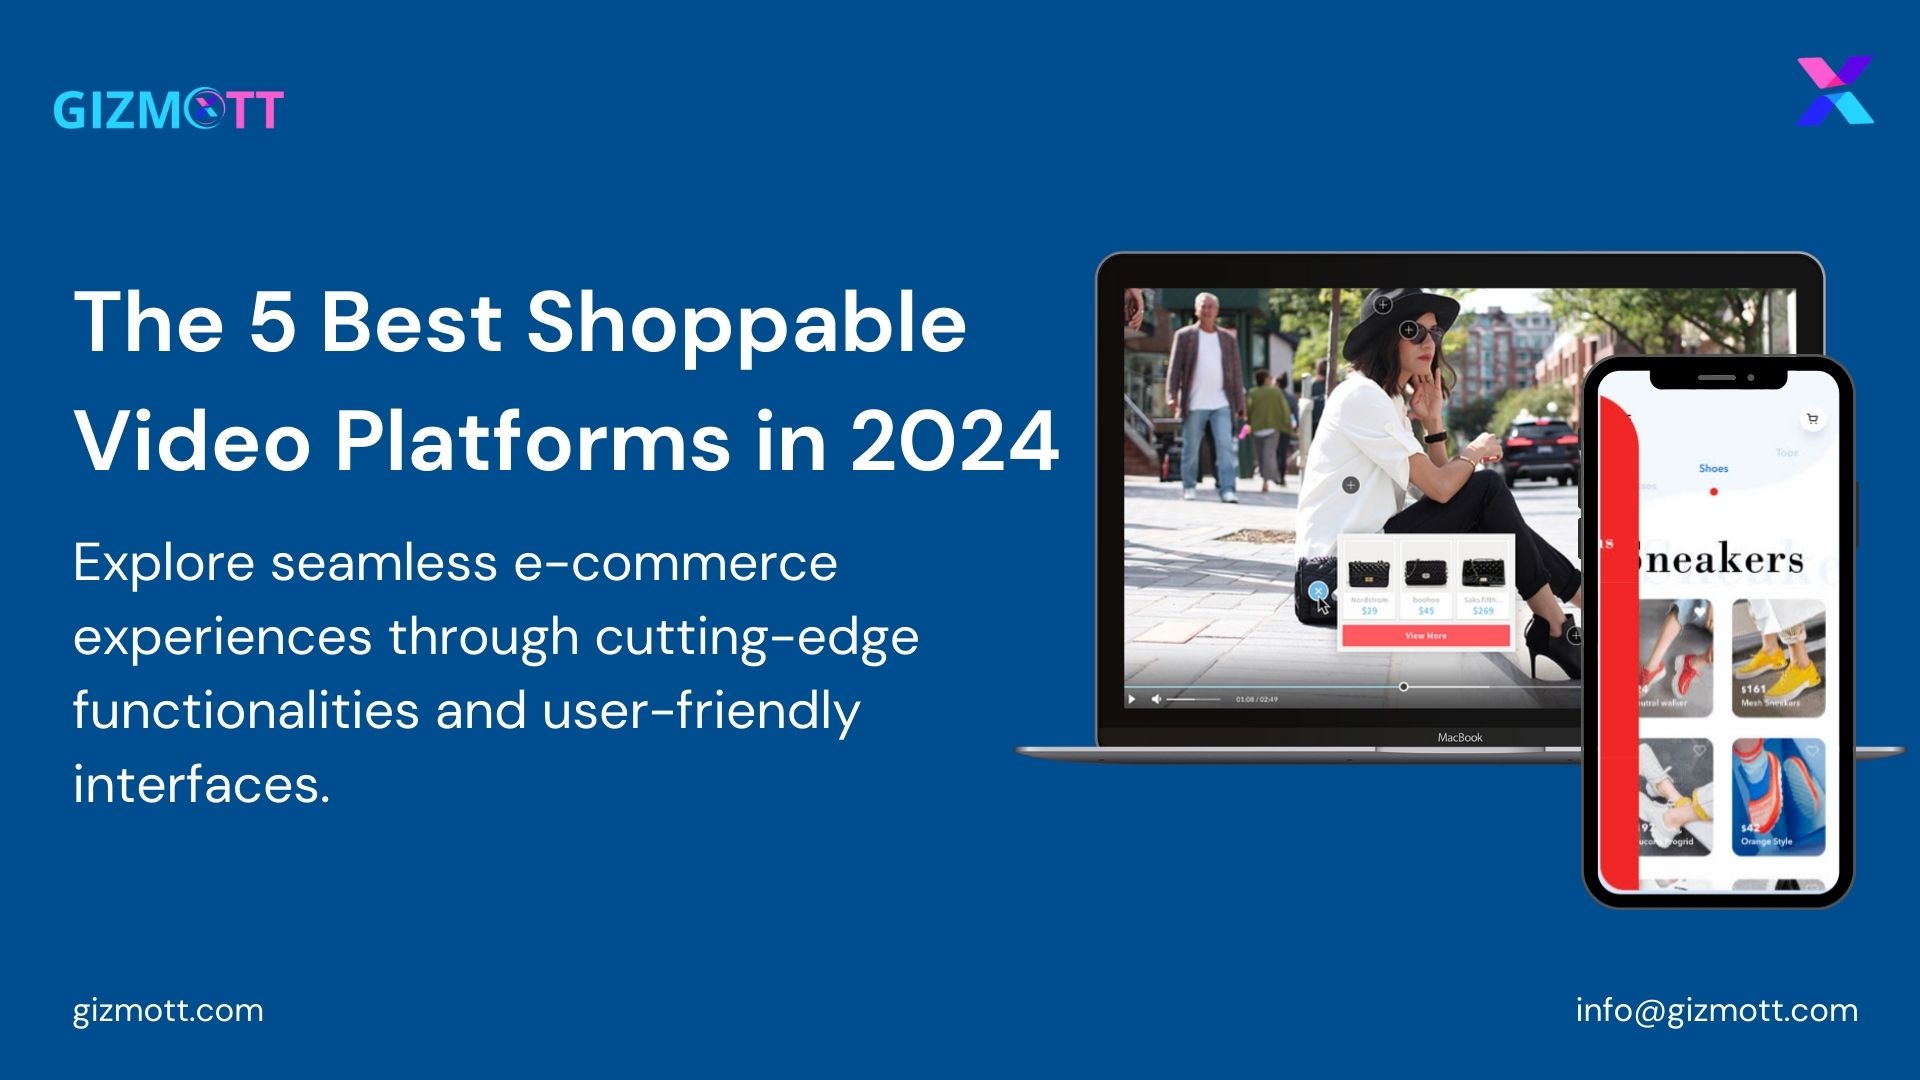 The 5 Best Shoppable Video Platforms in 2024